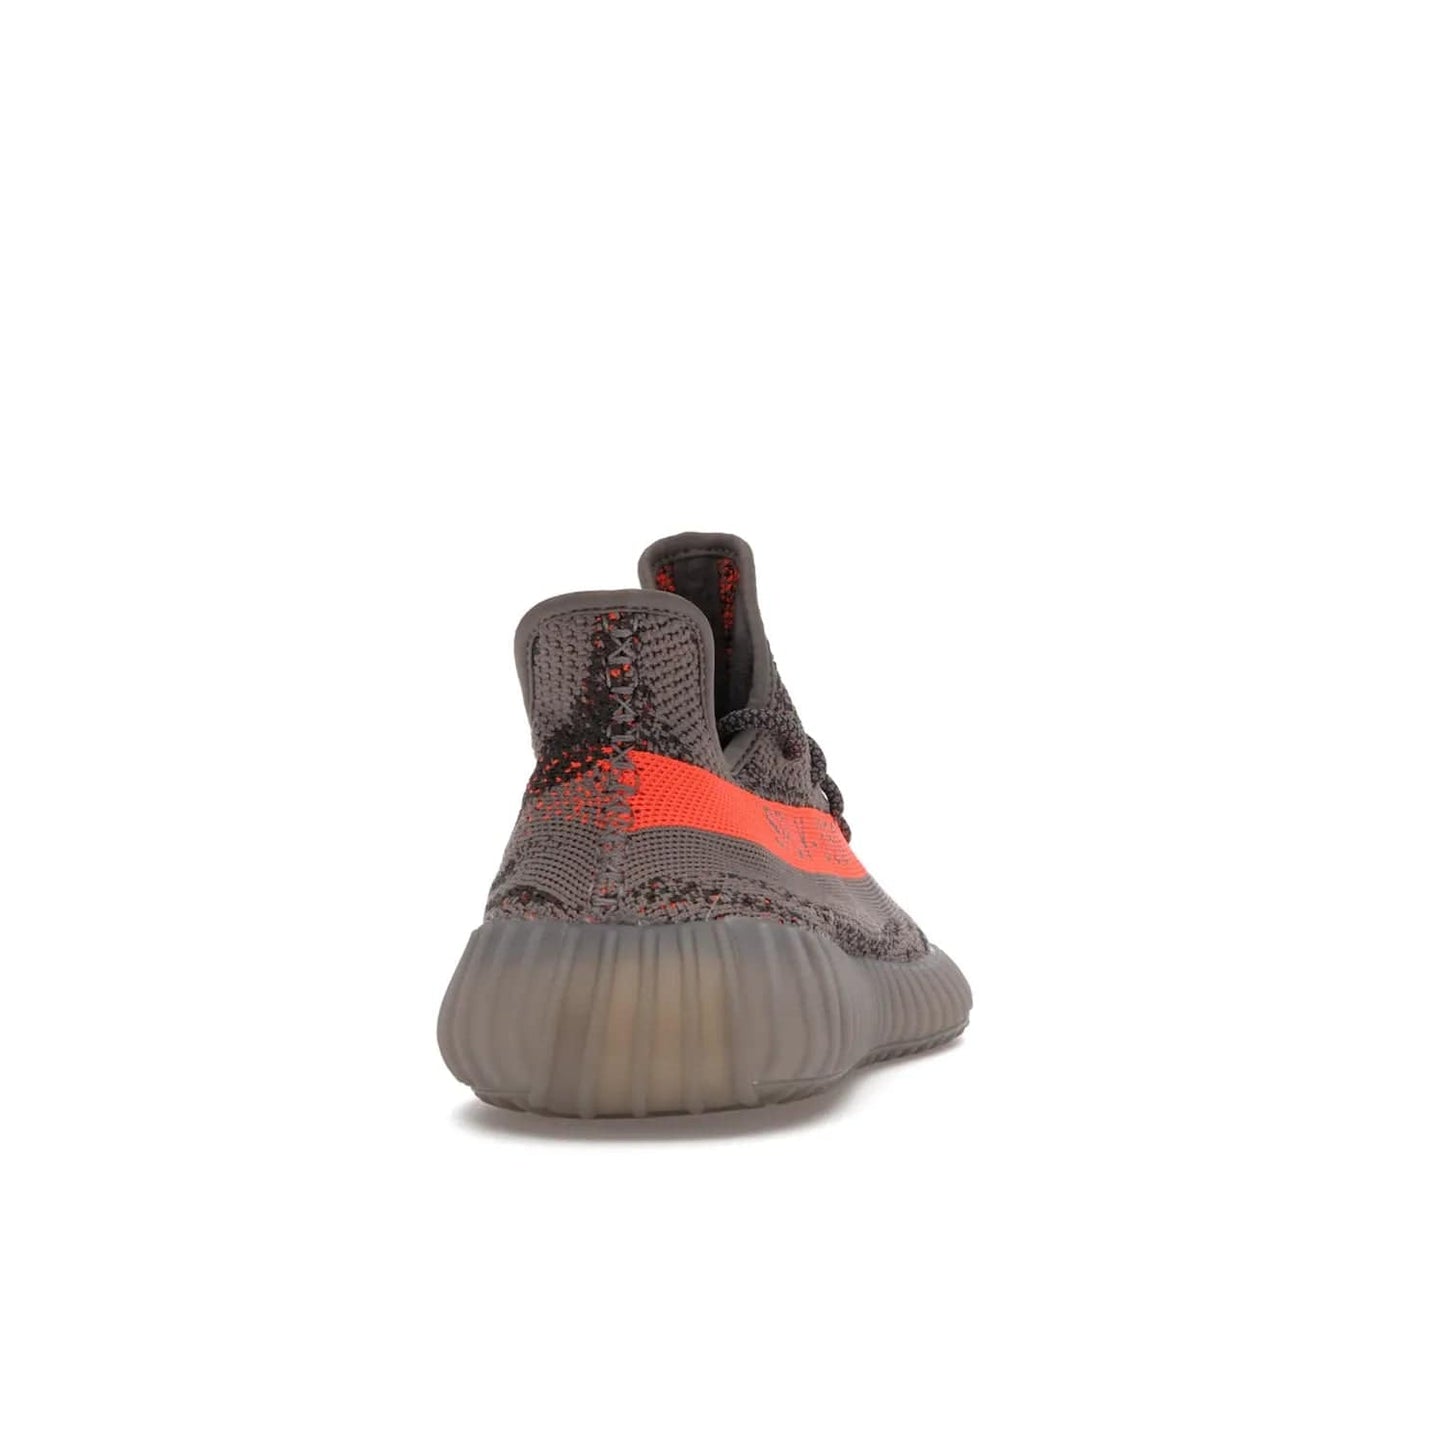 adidas Yeezy Boost 350 V2 Beluga Reflective - Image 29 - Only at www.BallersClubKickz.com - Shop the adidas Yeezy Boost 350 V2 Beluga Reflective: a stylish, reflective sneaker that stands out. Featuring Boost sole, Primeknit upper & signature orange stripe. Available Dec 2021.